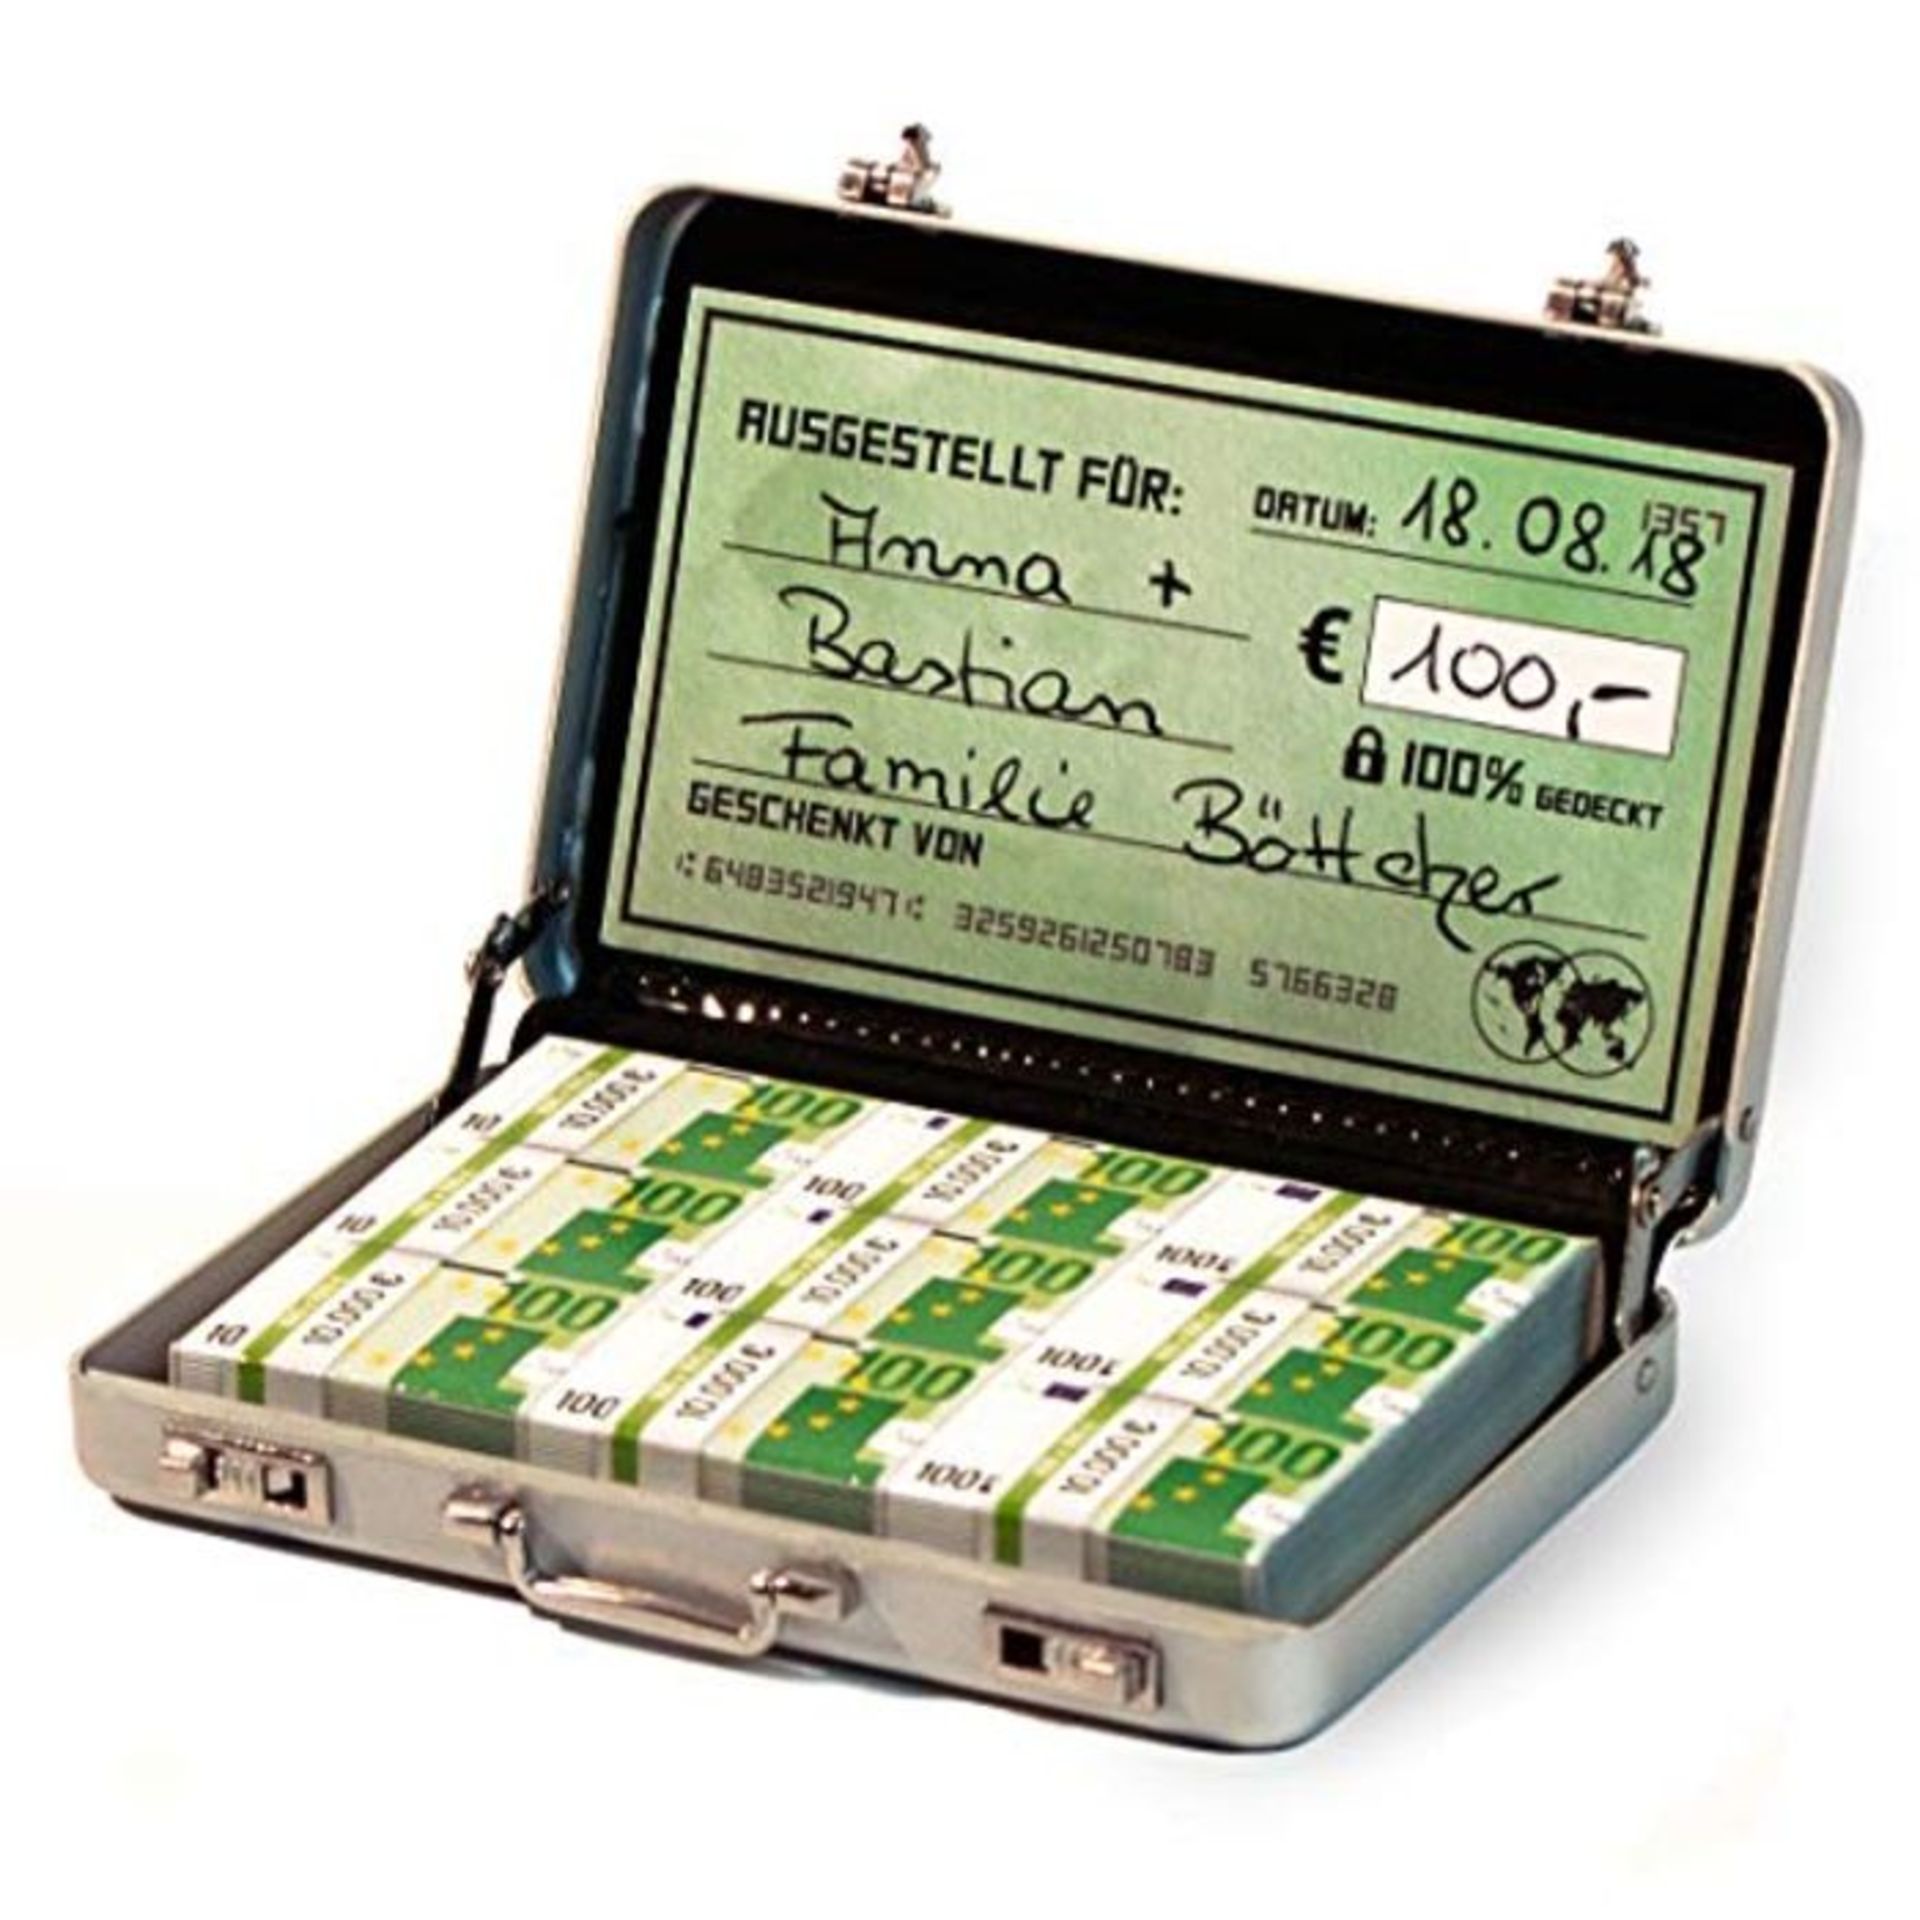 Chroma Products Money Box as Money Gift or for Vouchers - Mini Briefcase Made of Alumi